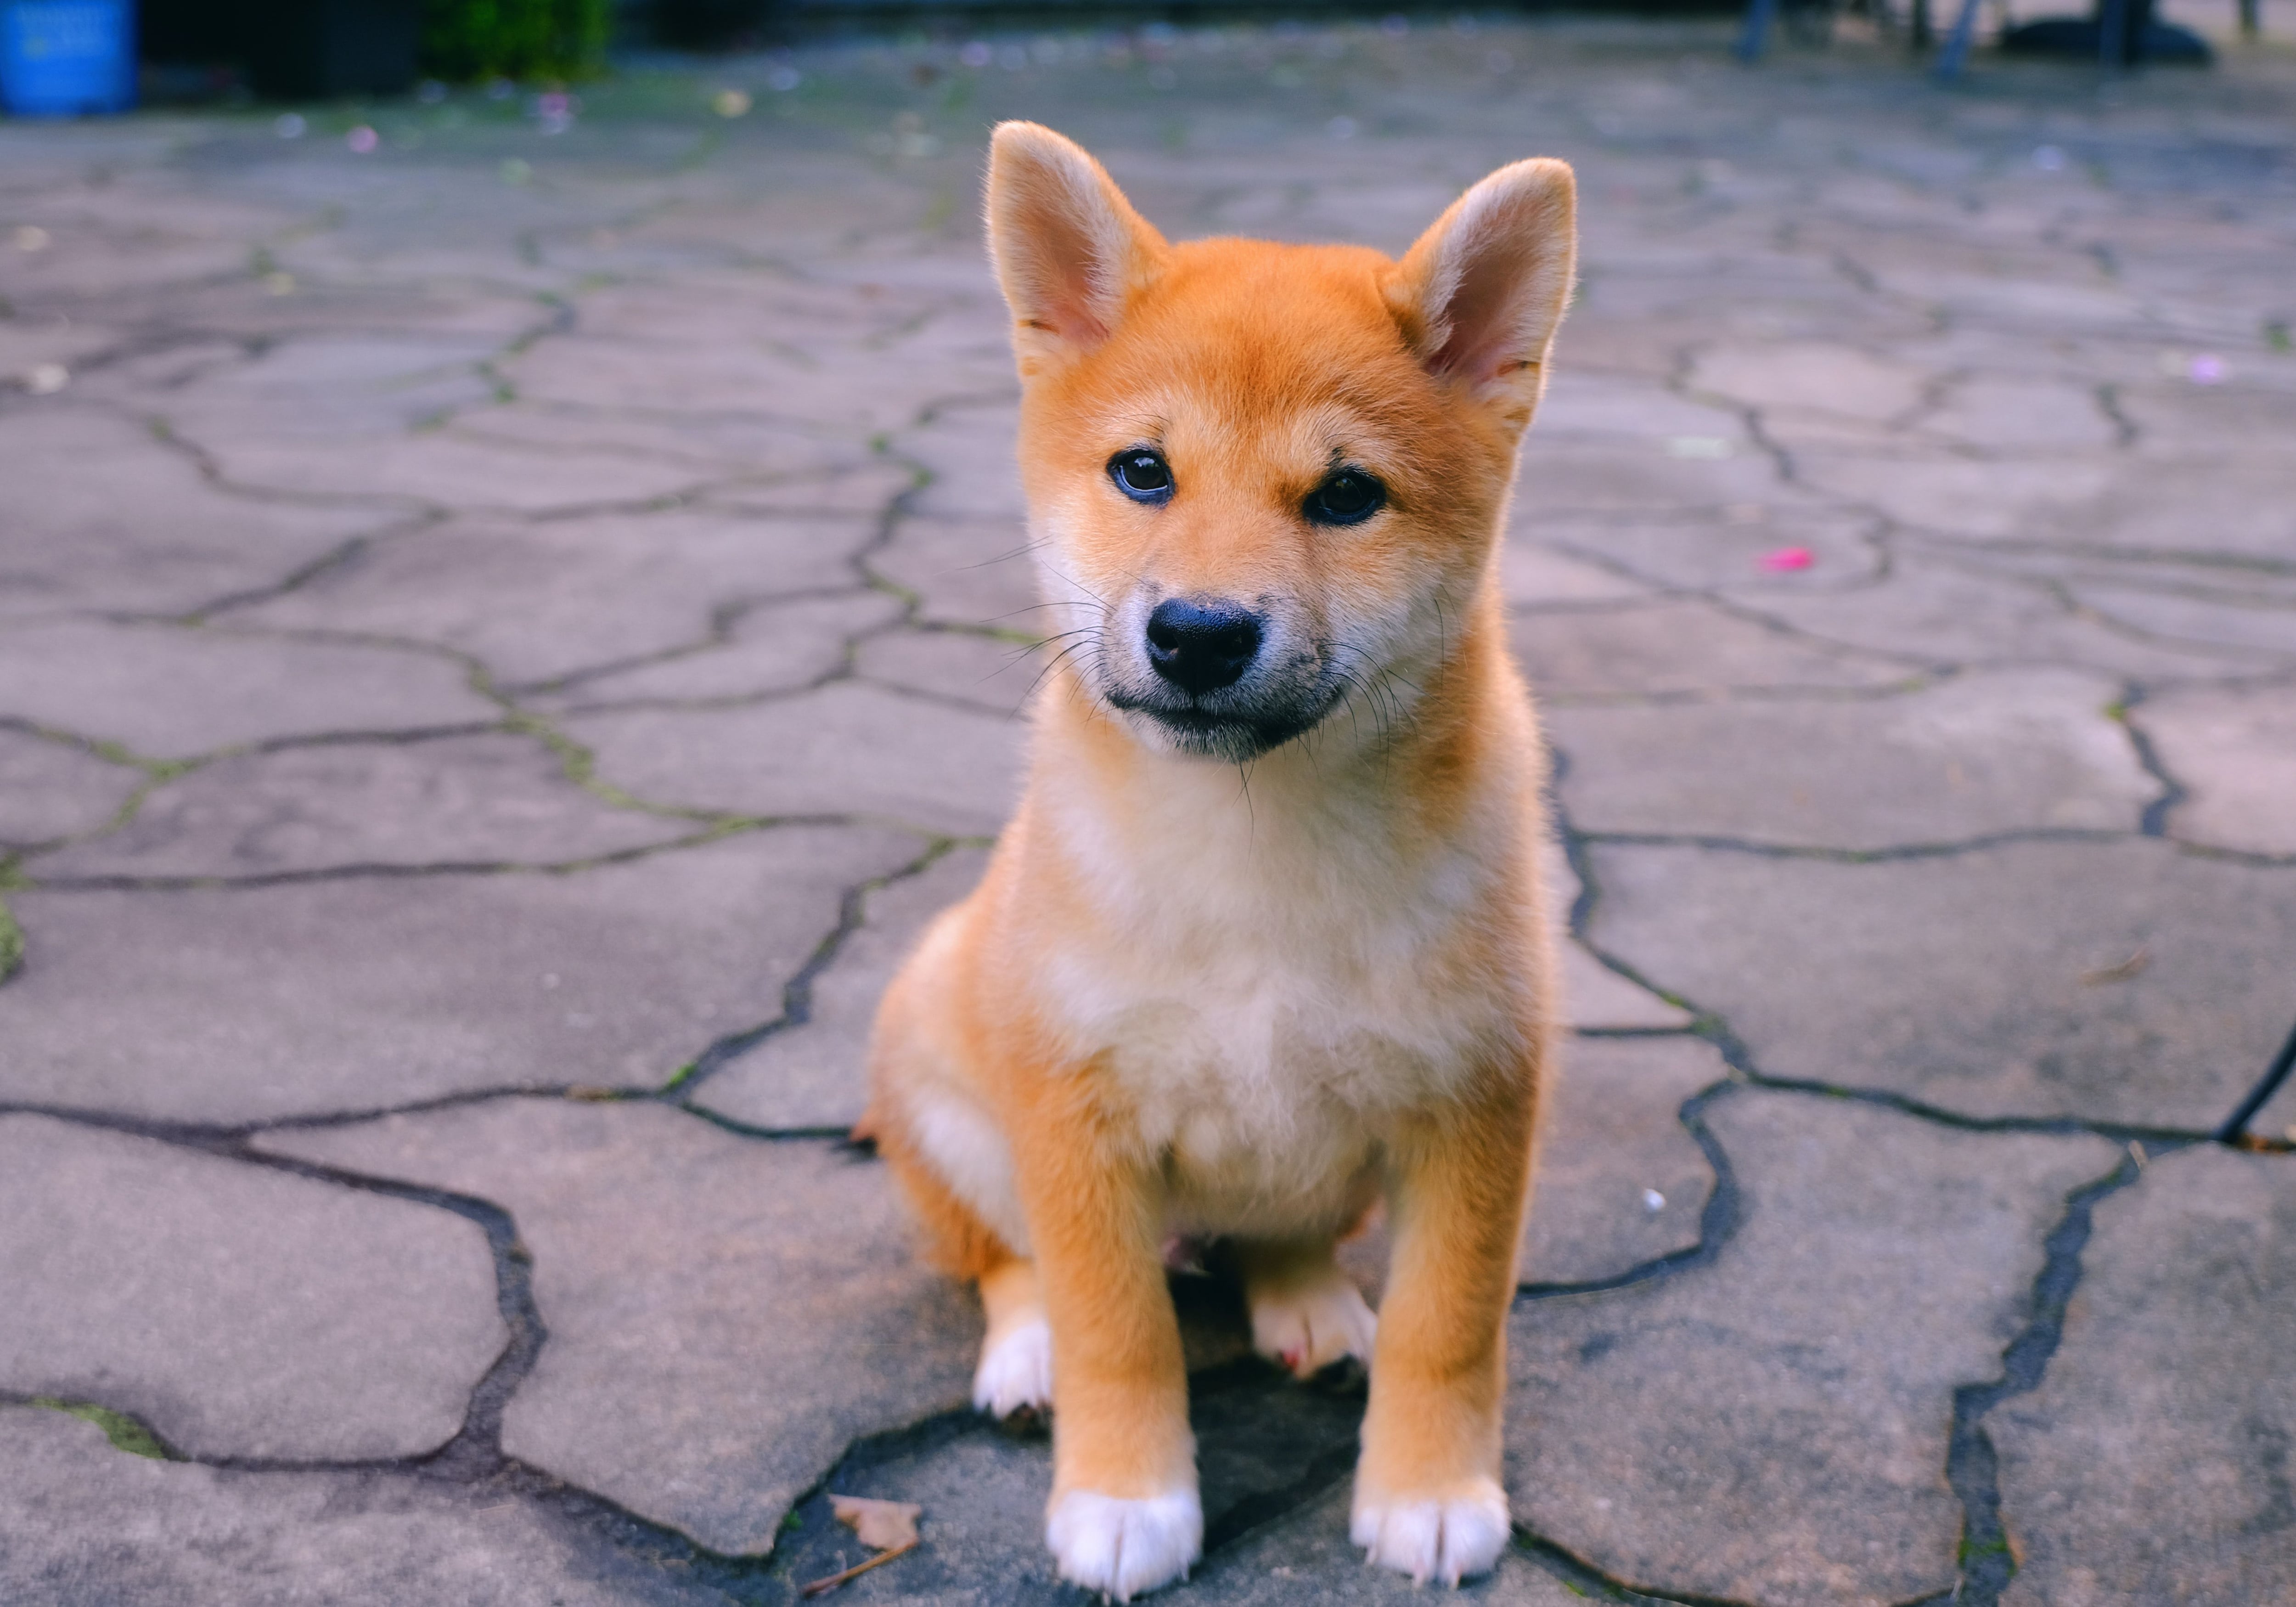 Buzz Around Shiba Inu Is Nowhere Close to Retail Frenzy Seen in Mayon October 8, 2021 at 7:25 pm